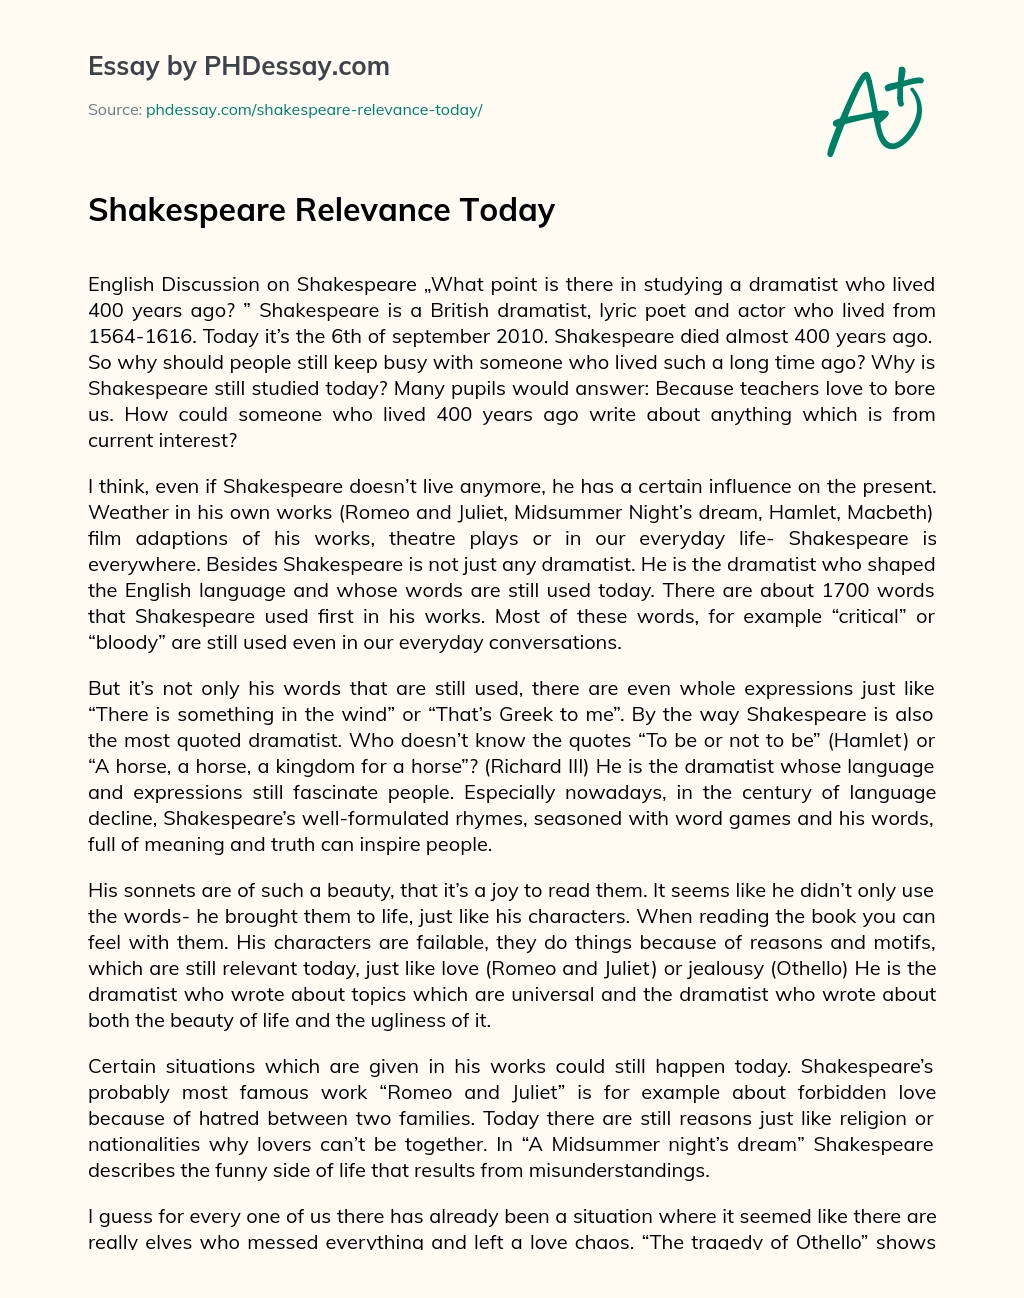 pay to write custom college essay on shakespeare